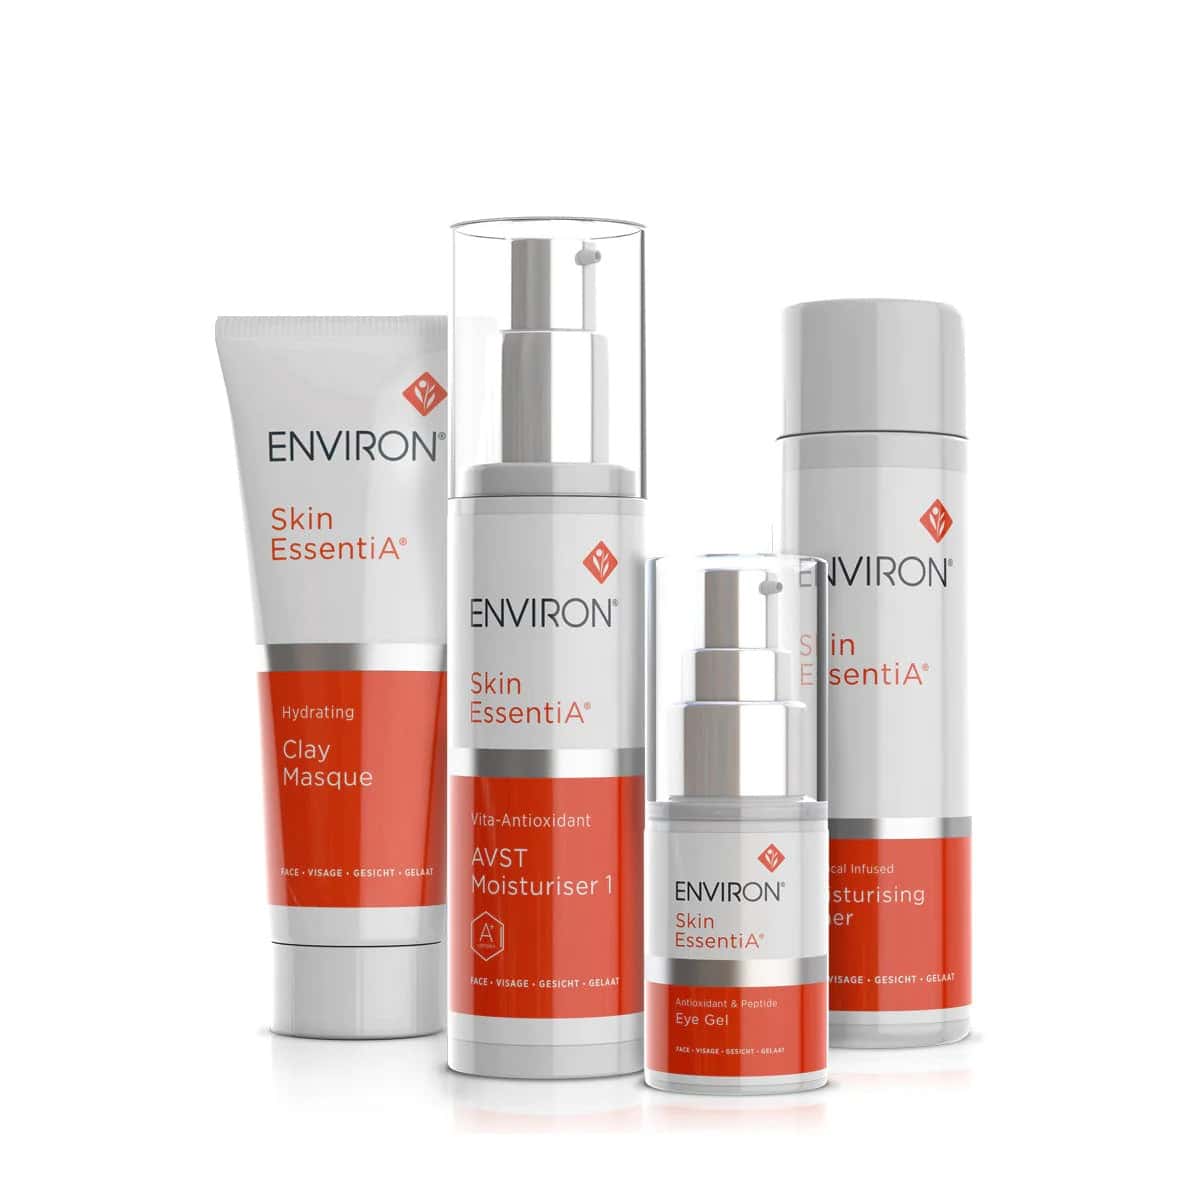 Environ Skin Care Products | Glowtox In NYC, NY